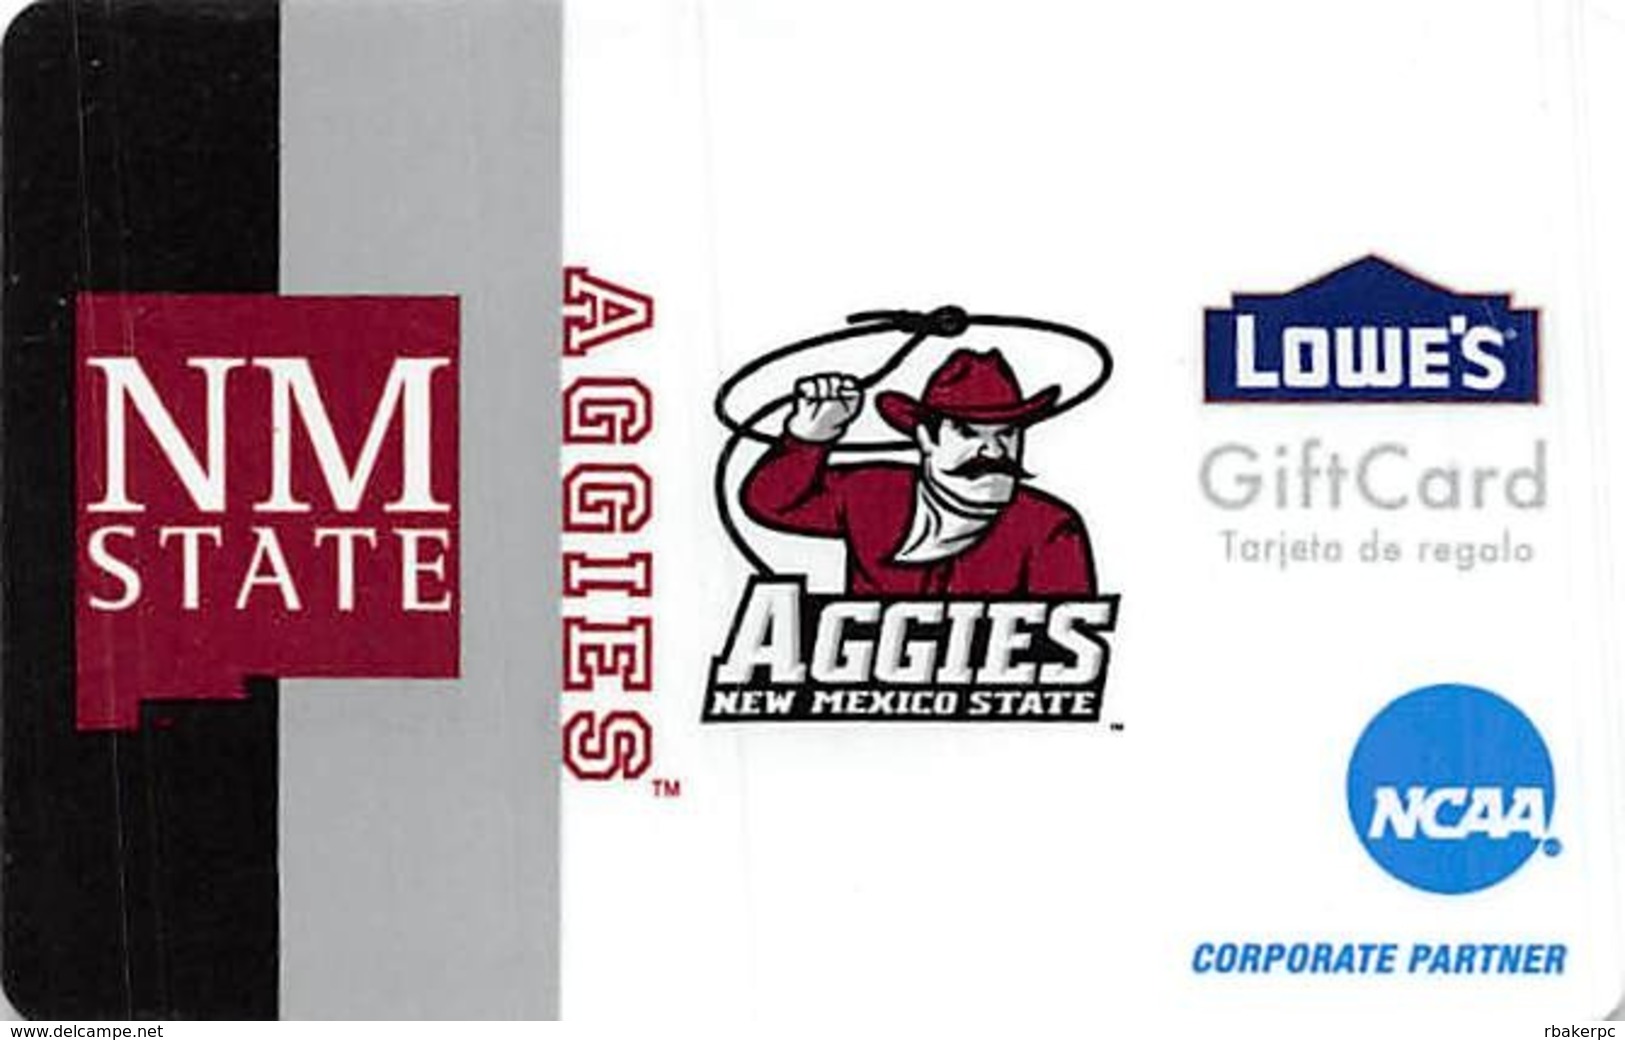 Lowes NCAA Gift Card - New Mexico State Aggies - Gift Cards